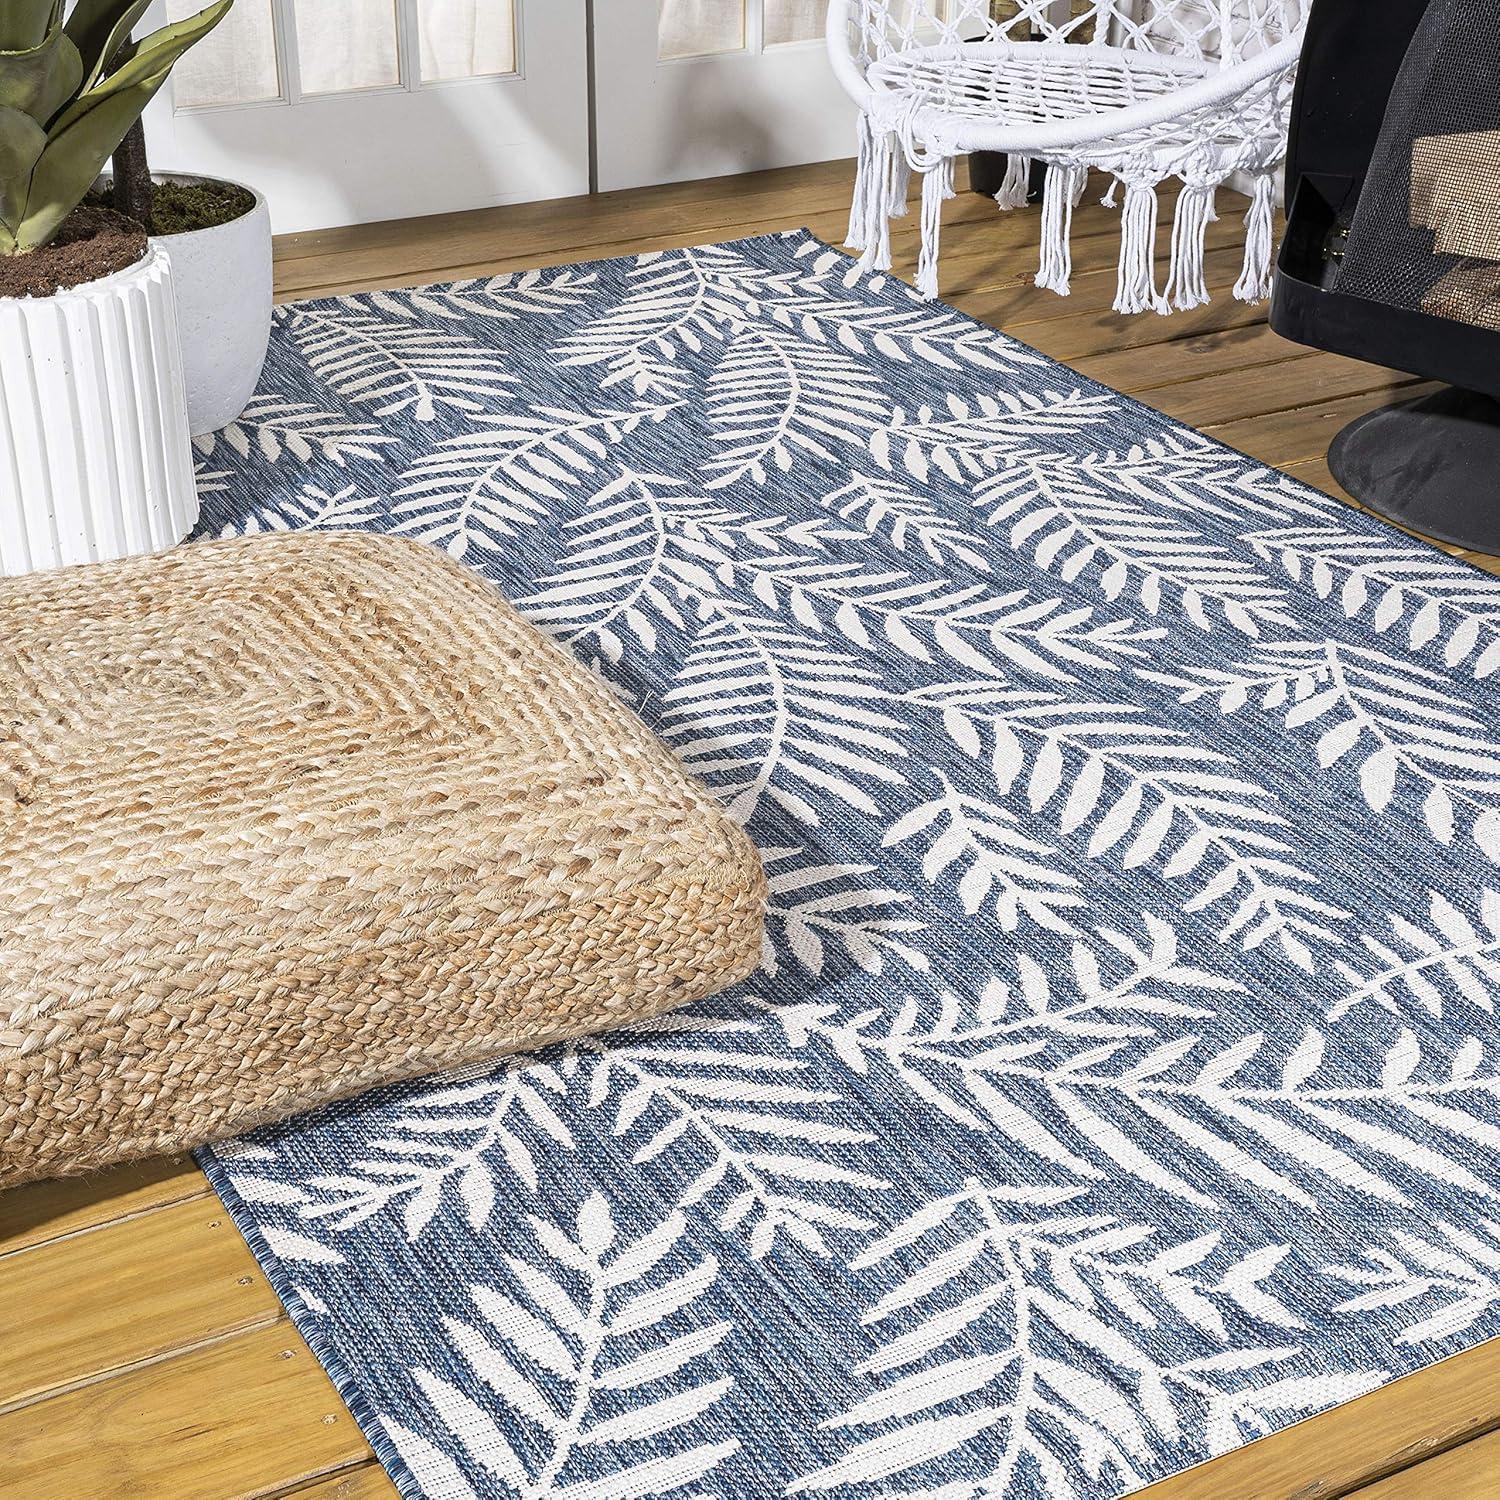 Ivory and Navy Palm Frond 4' x 6' Reversible Outdoor Rug